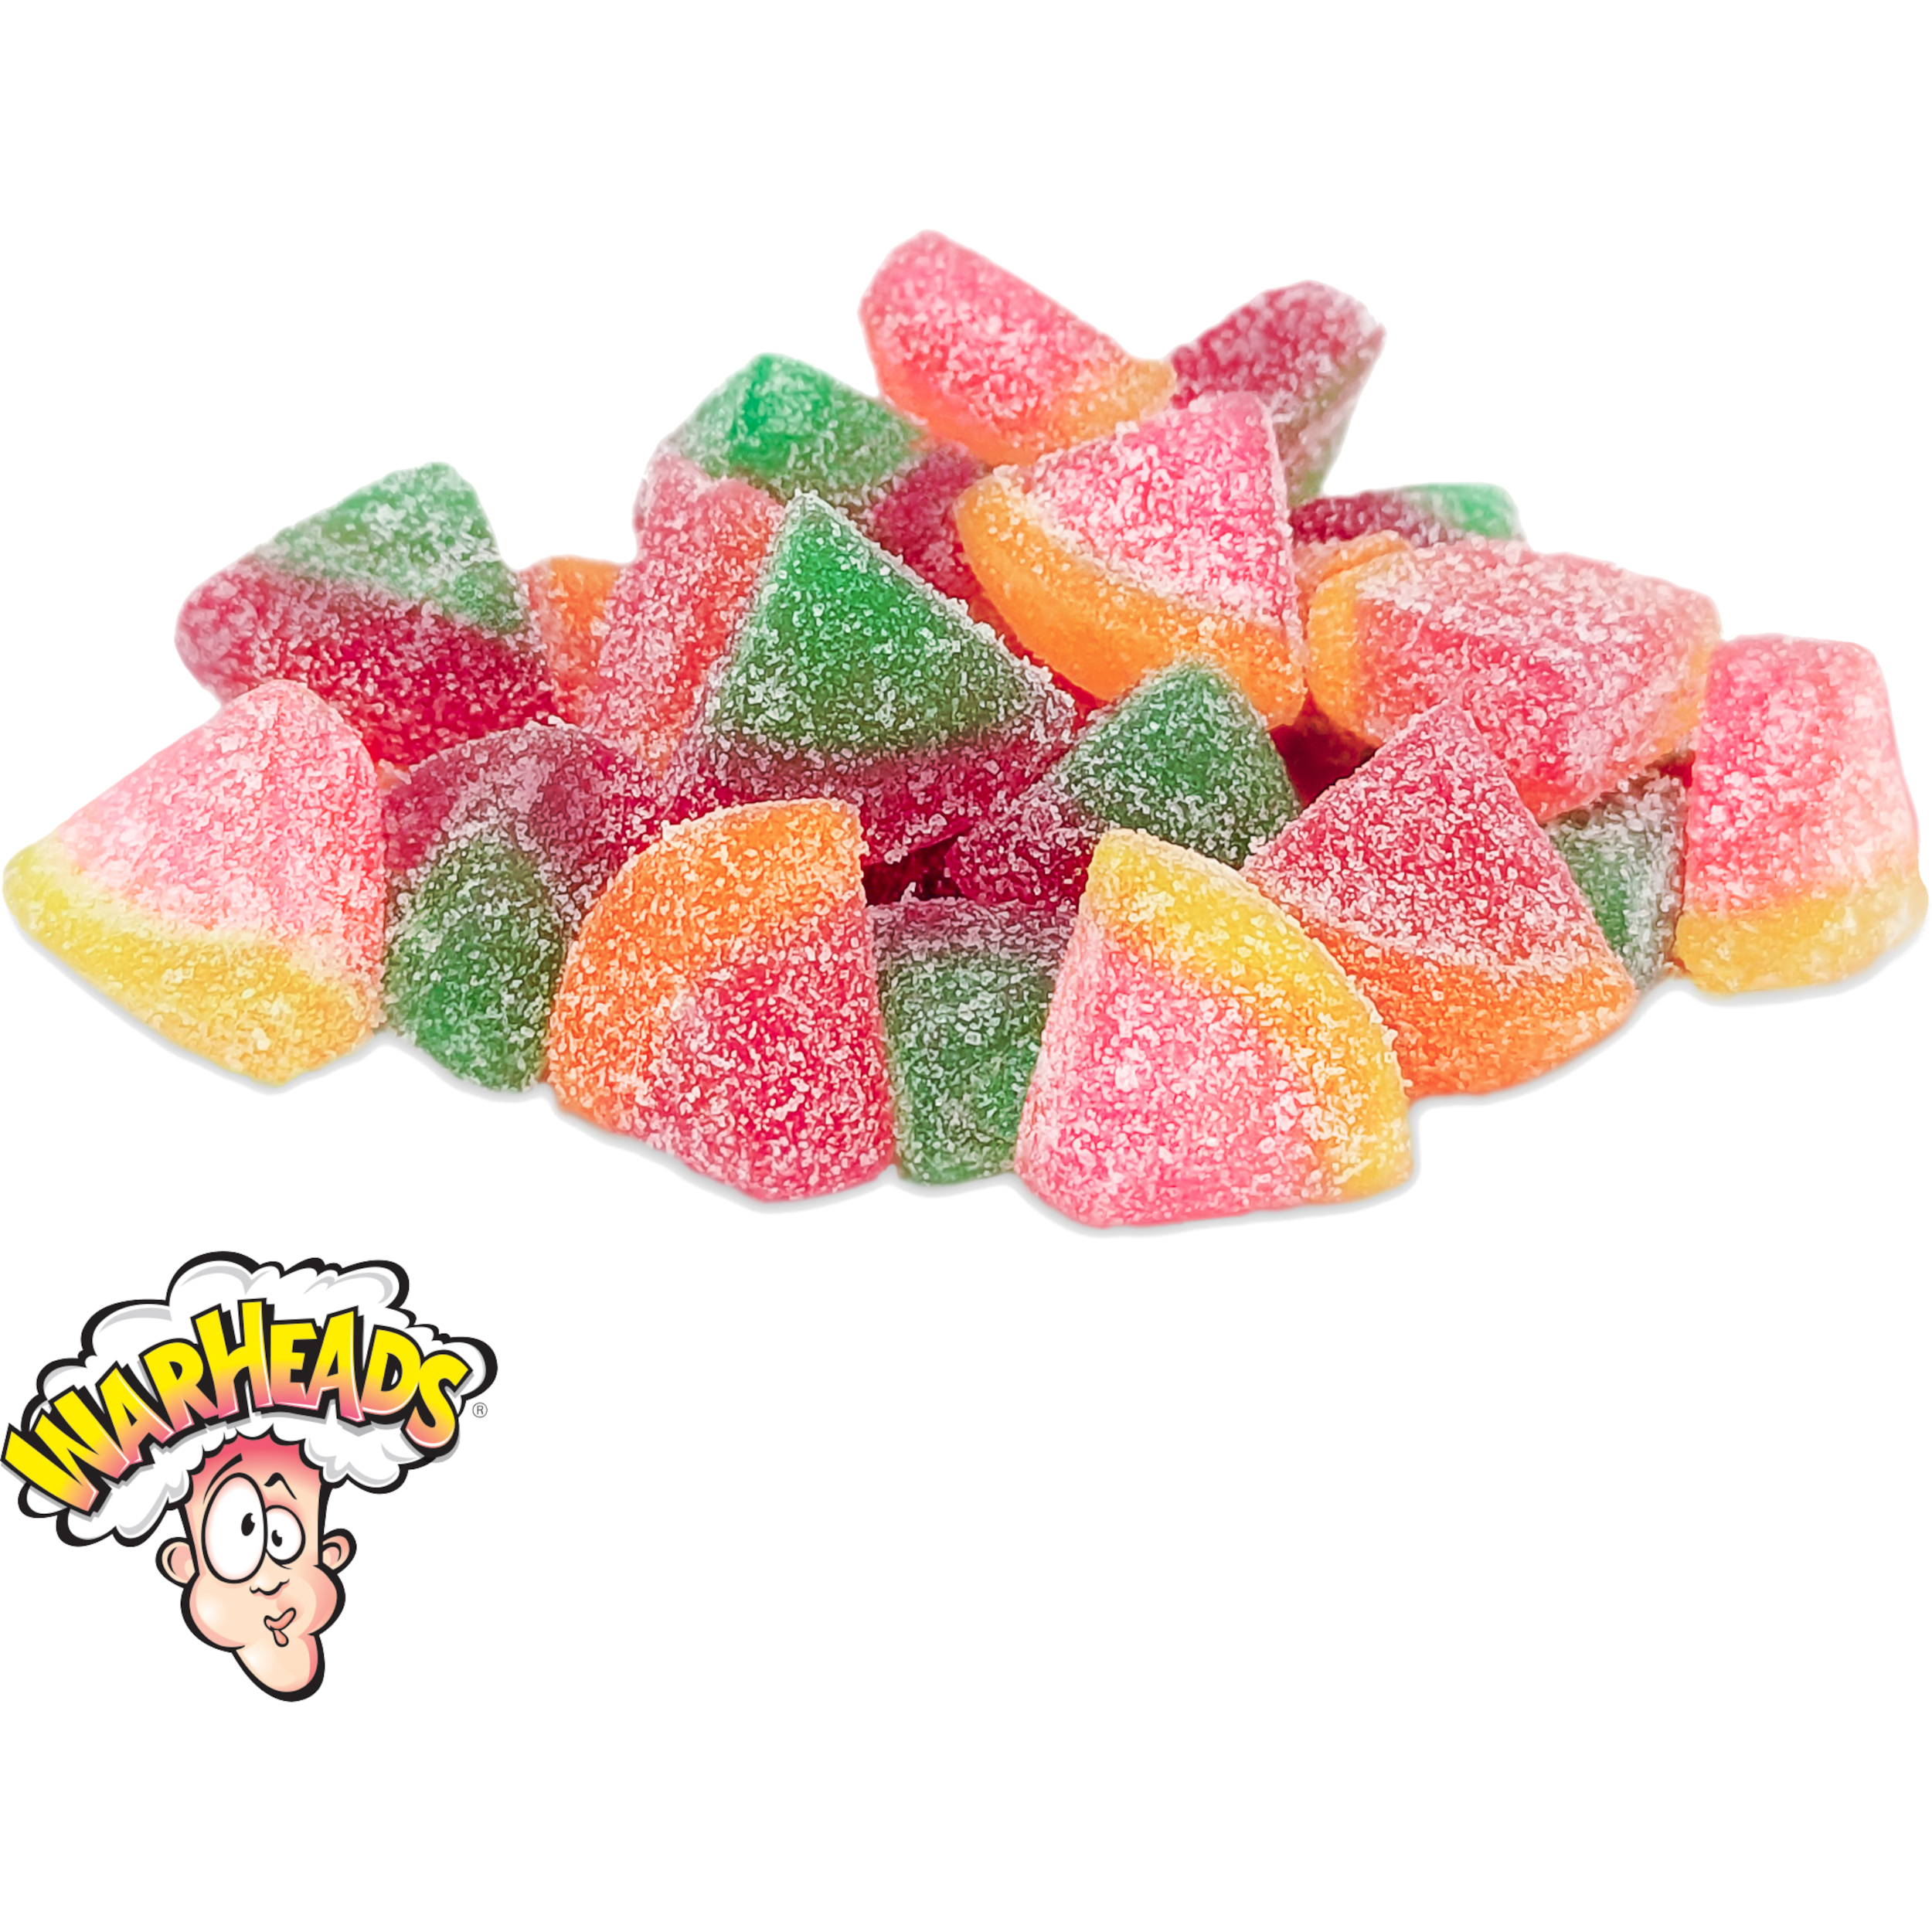 Warheads Wedgies Chewy Sour Candy, Assorted Flavors, 7.25oz - image 4 of 6